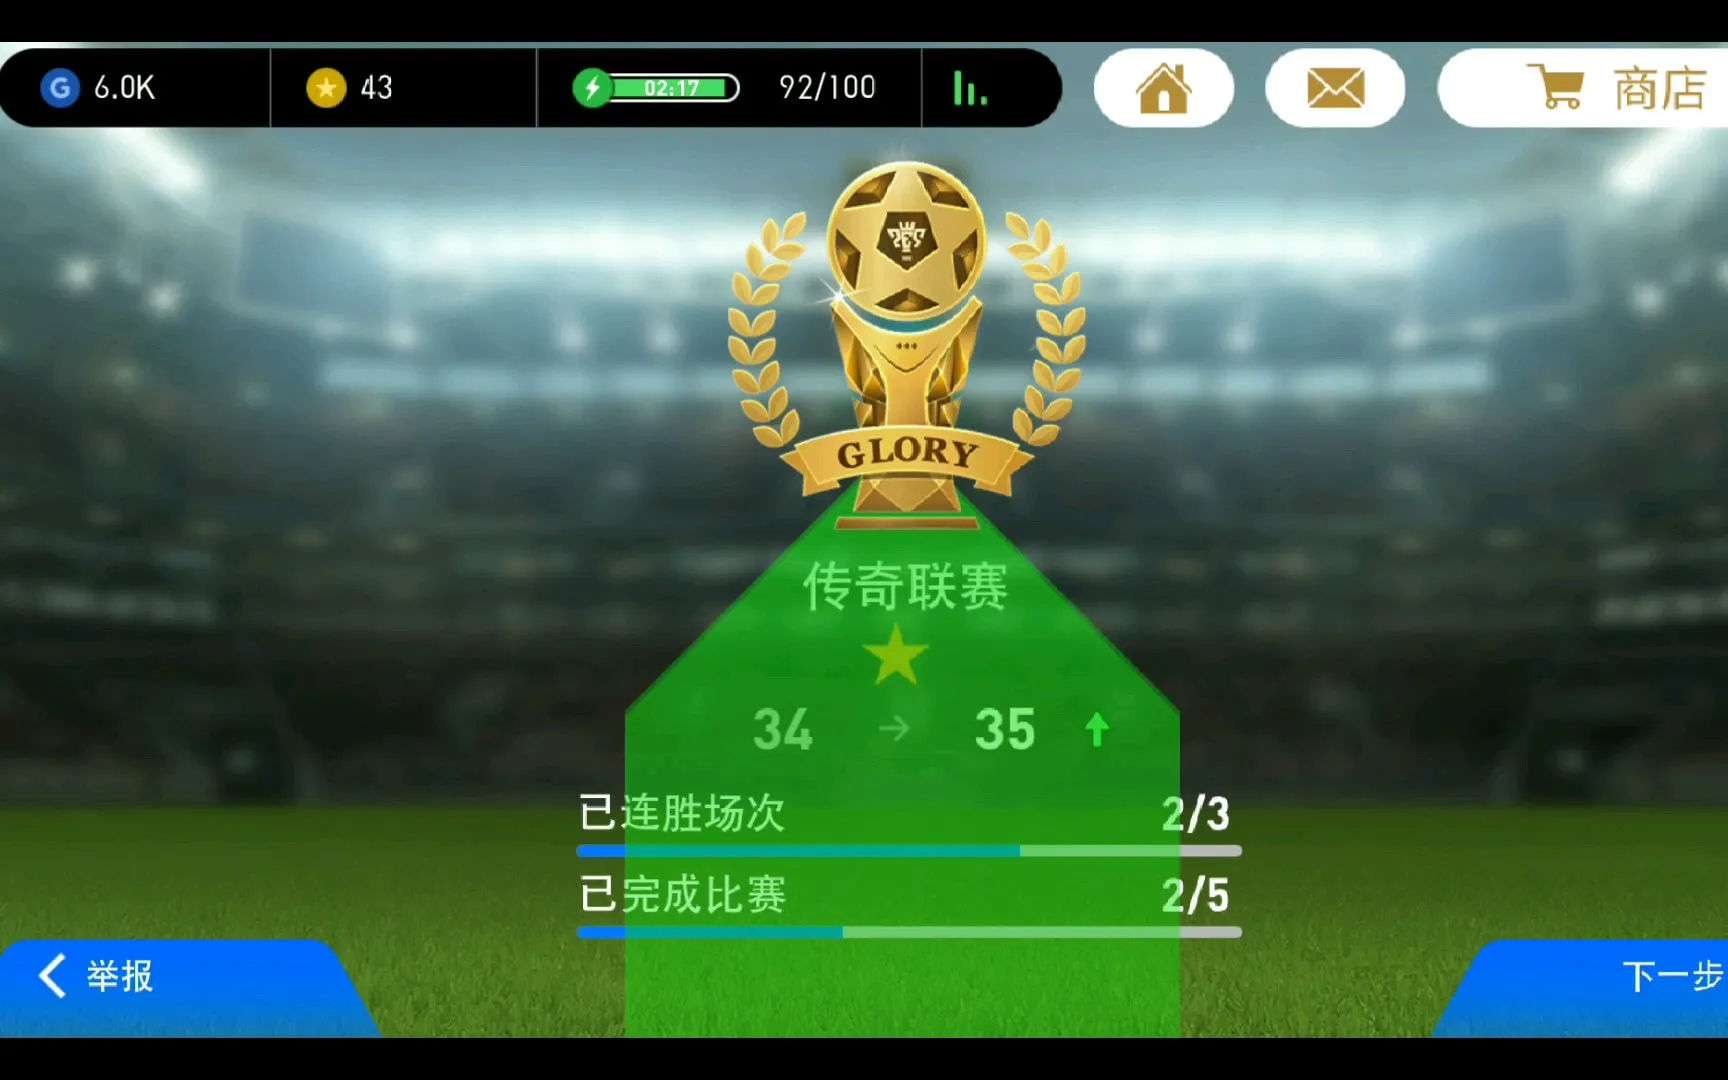  Recommended ranking of mobile soccer games